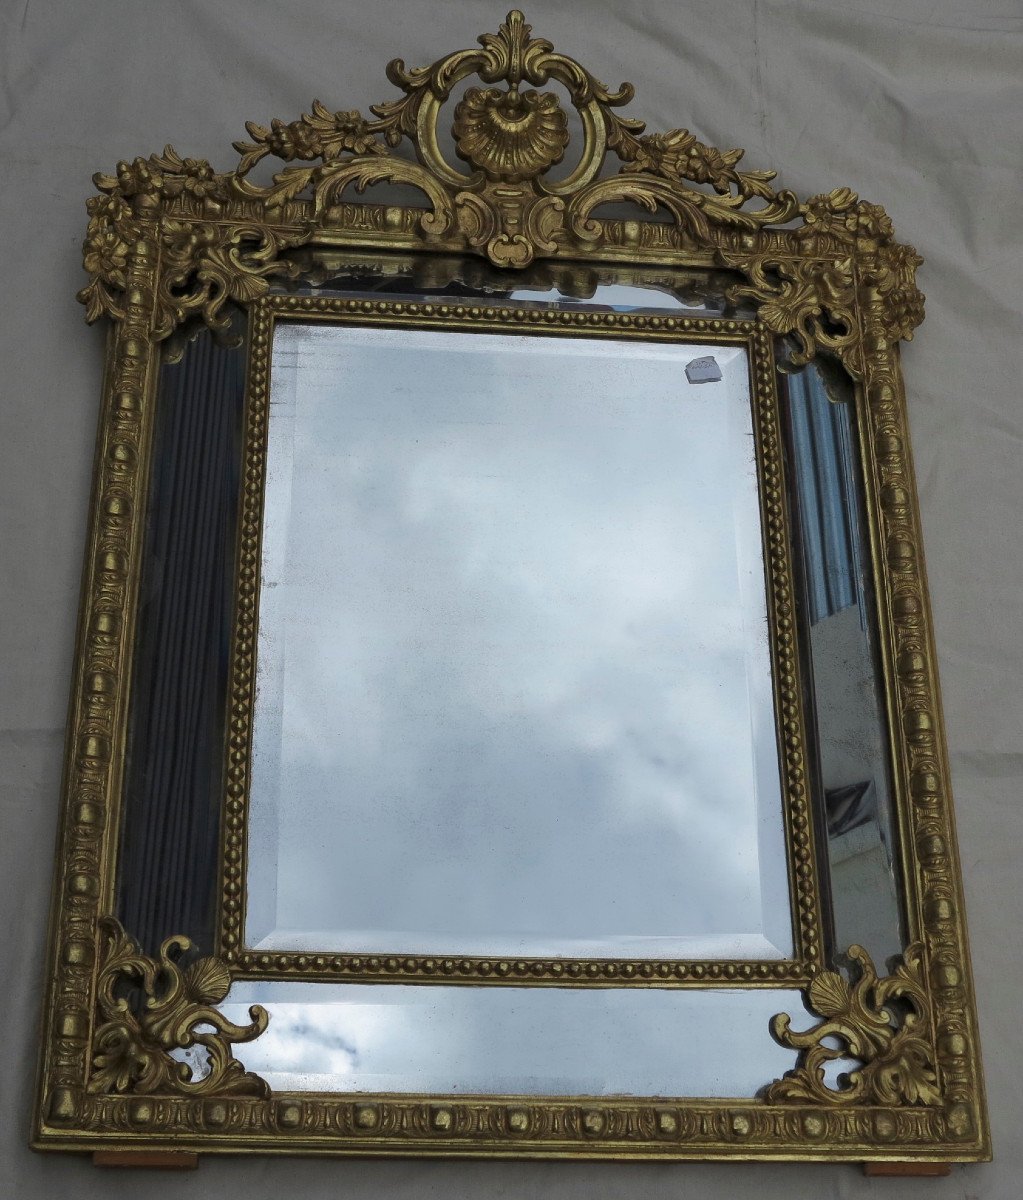 Regency Style Mirror With Mercury Ice Cream Parecloses Gilded With Gold 120 X 88 Cm